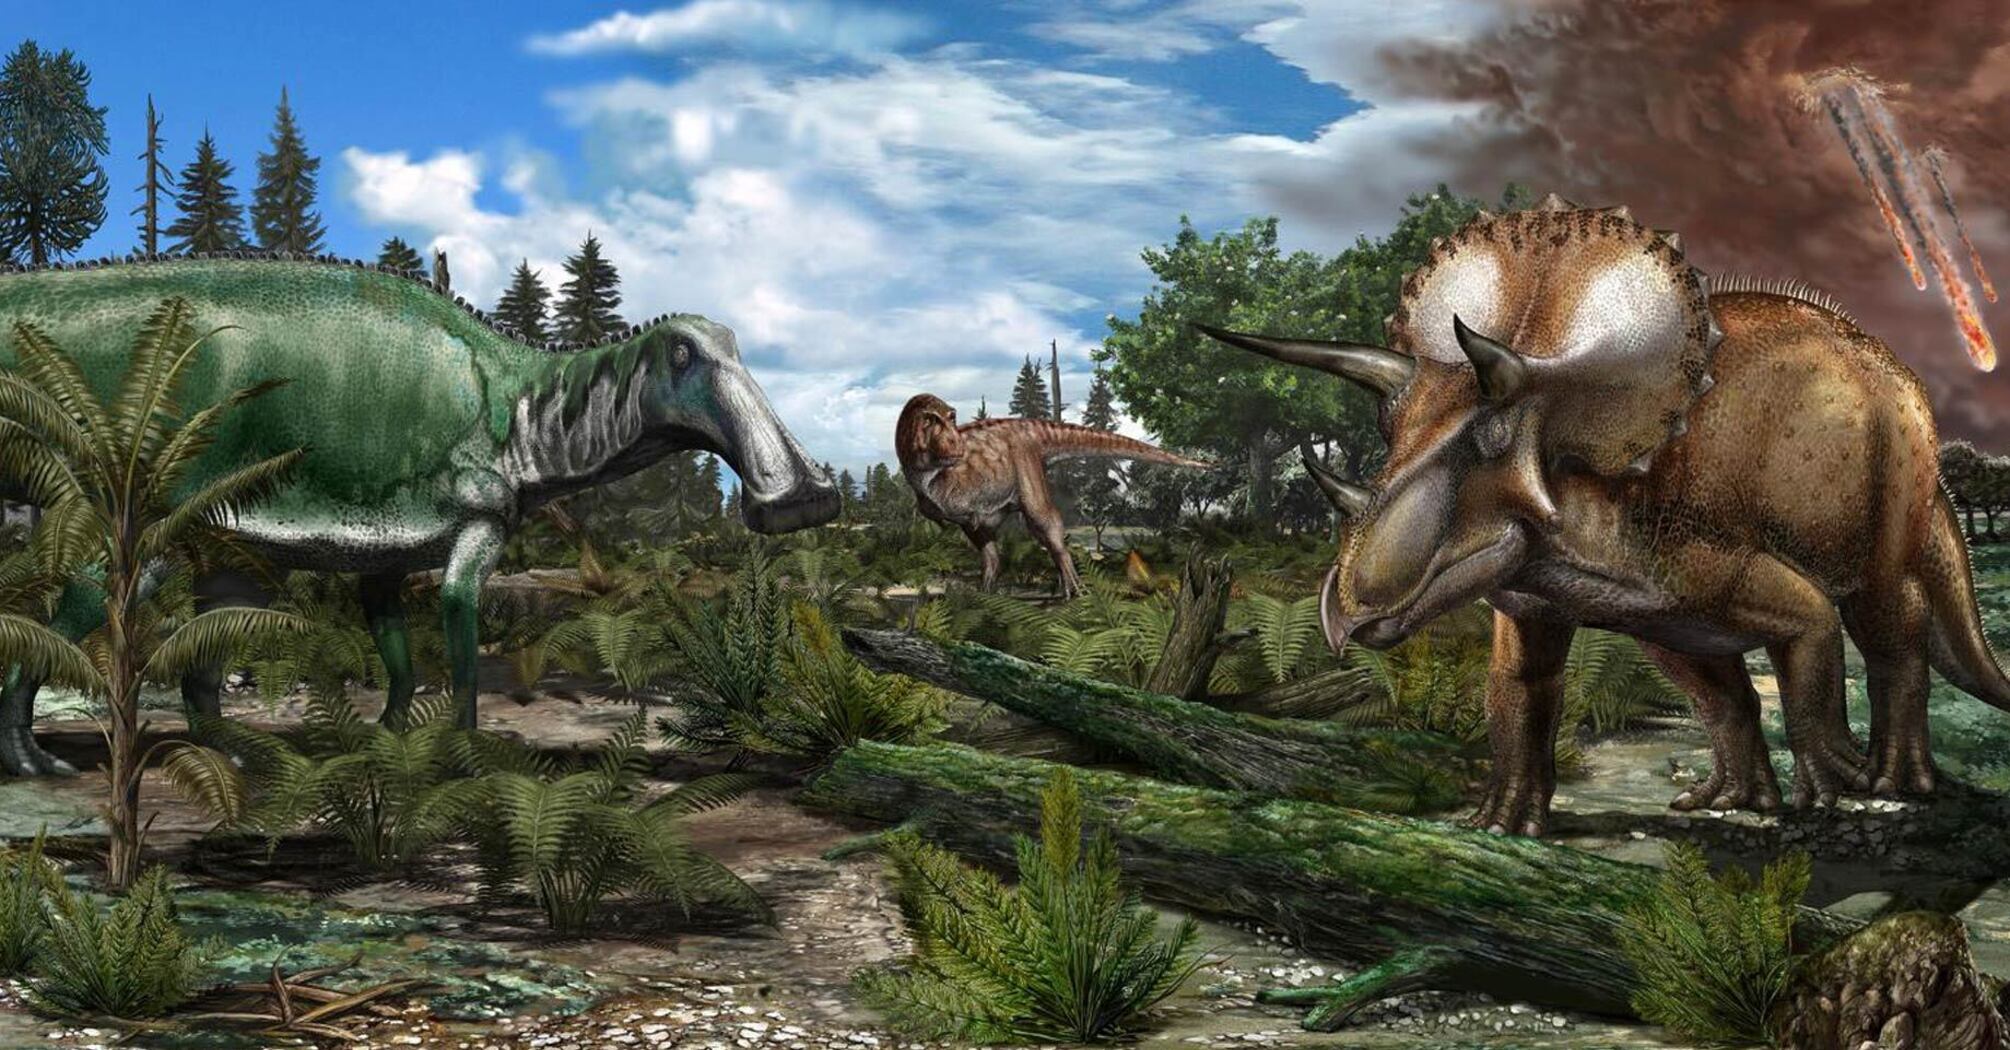 Can dinosaurs come back to life if the climate changes?